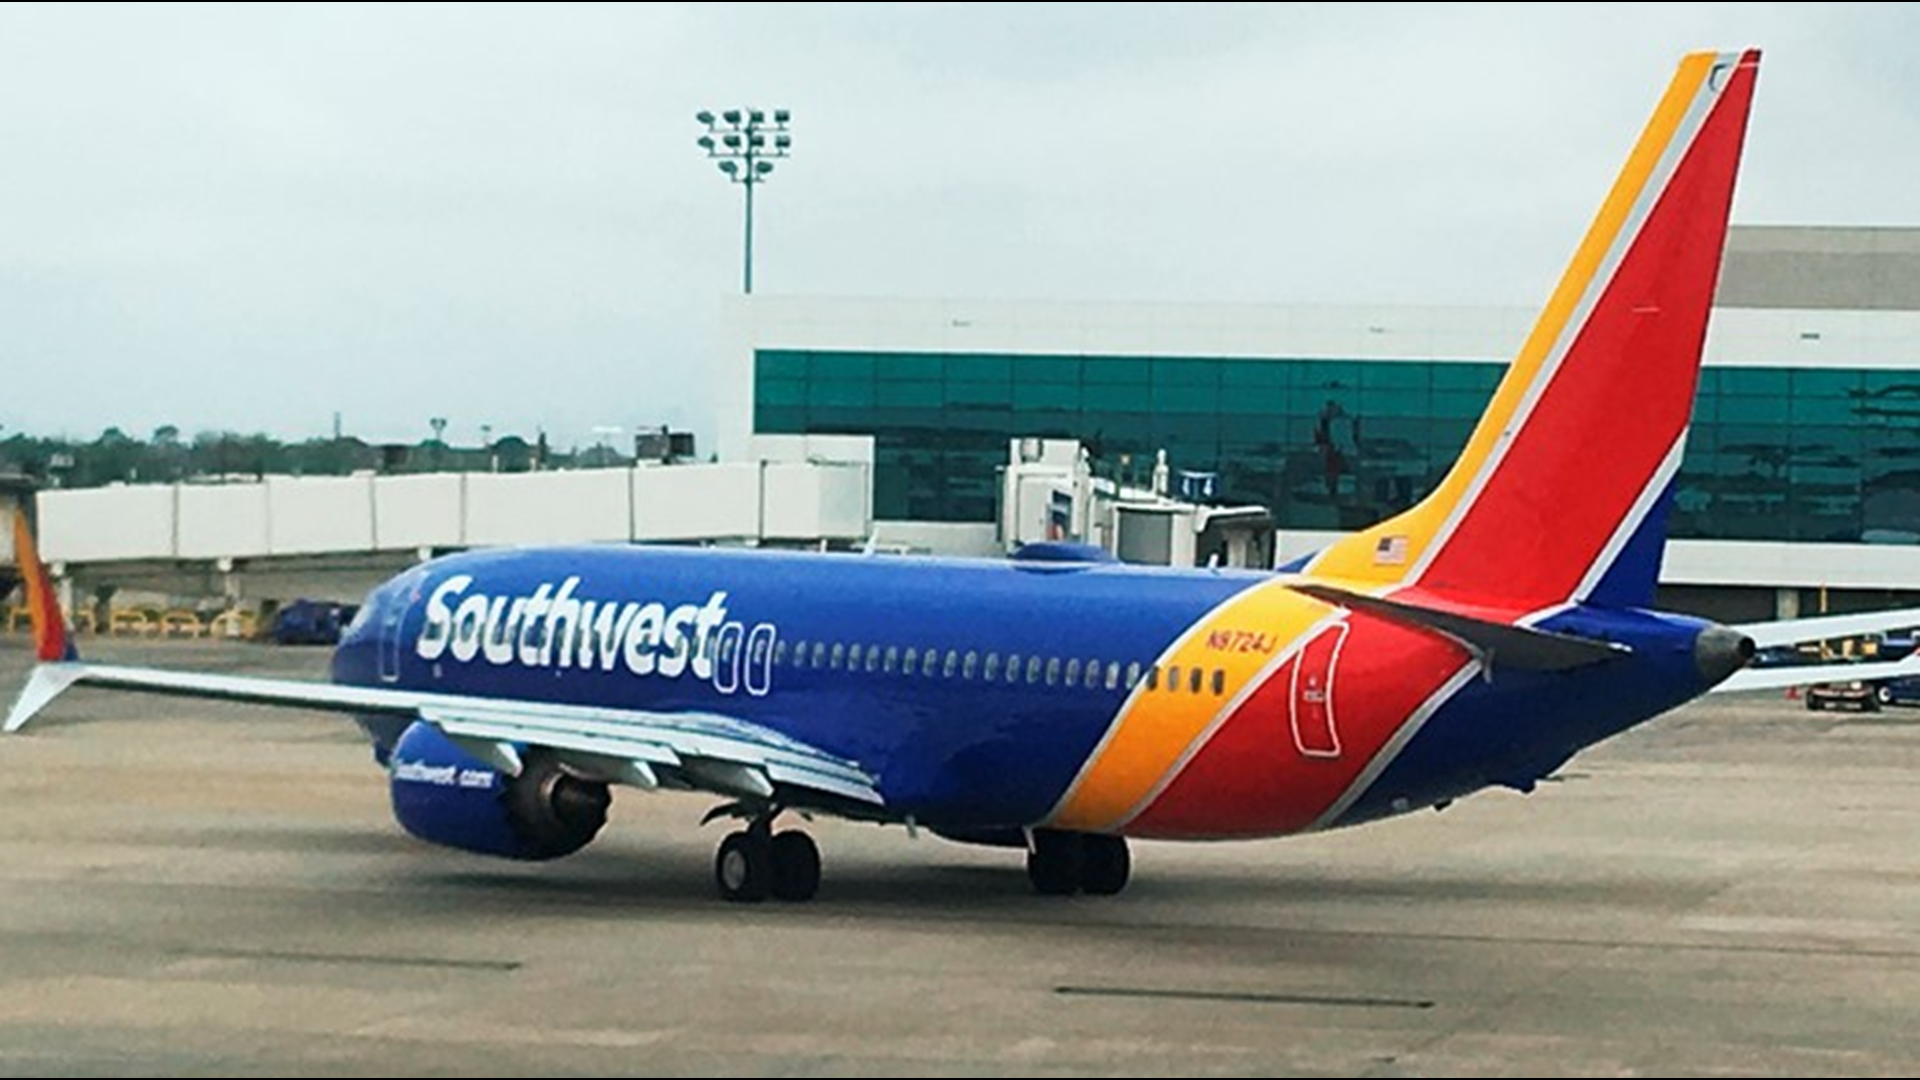 Southwest Airlines canceled many flights over the weekend. How will those cancellations impact us locally?